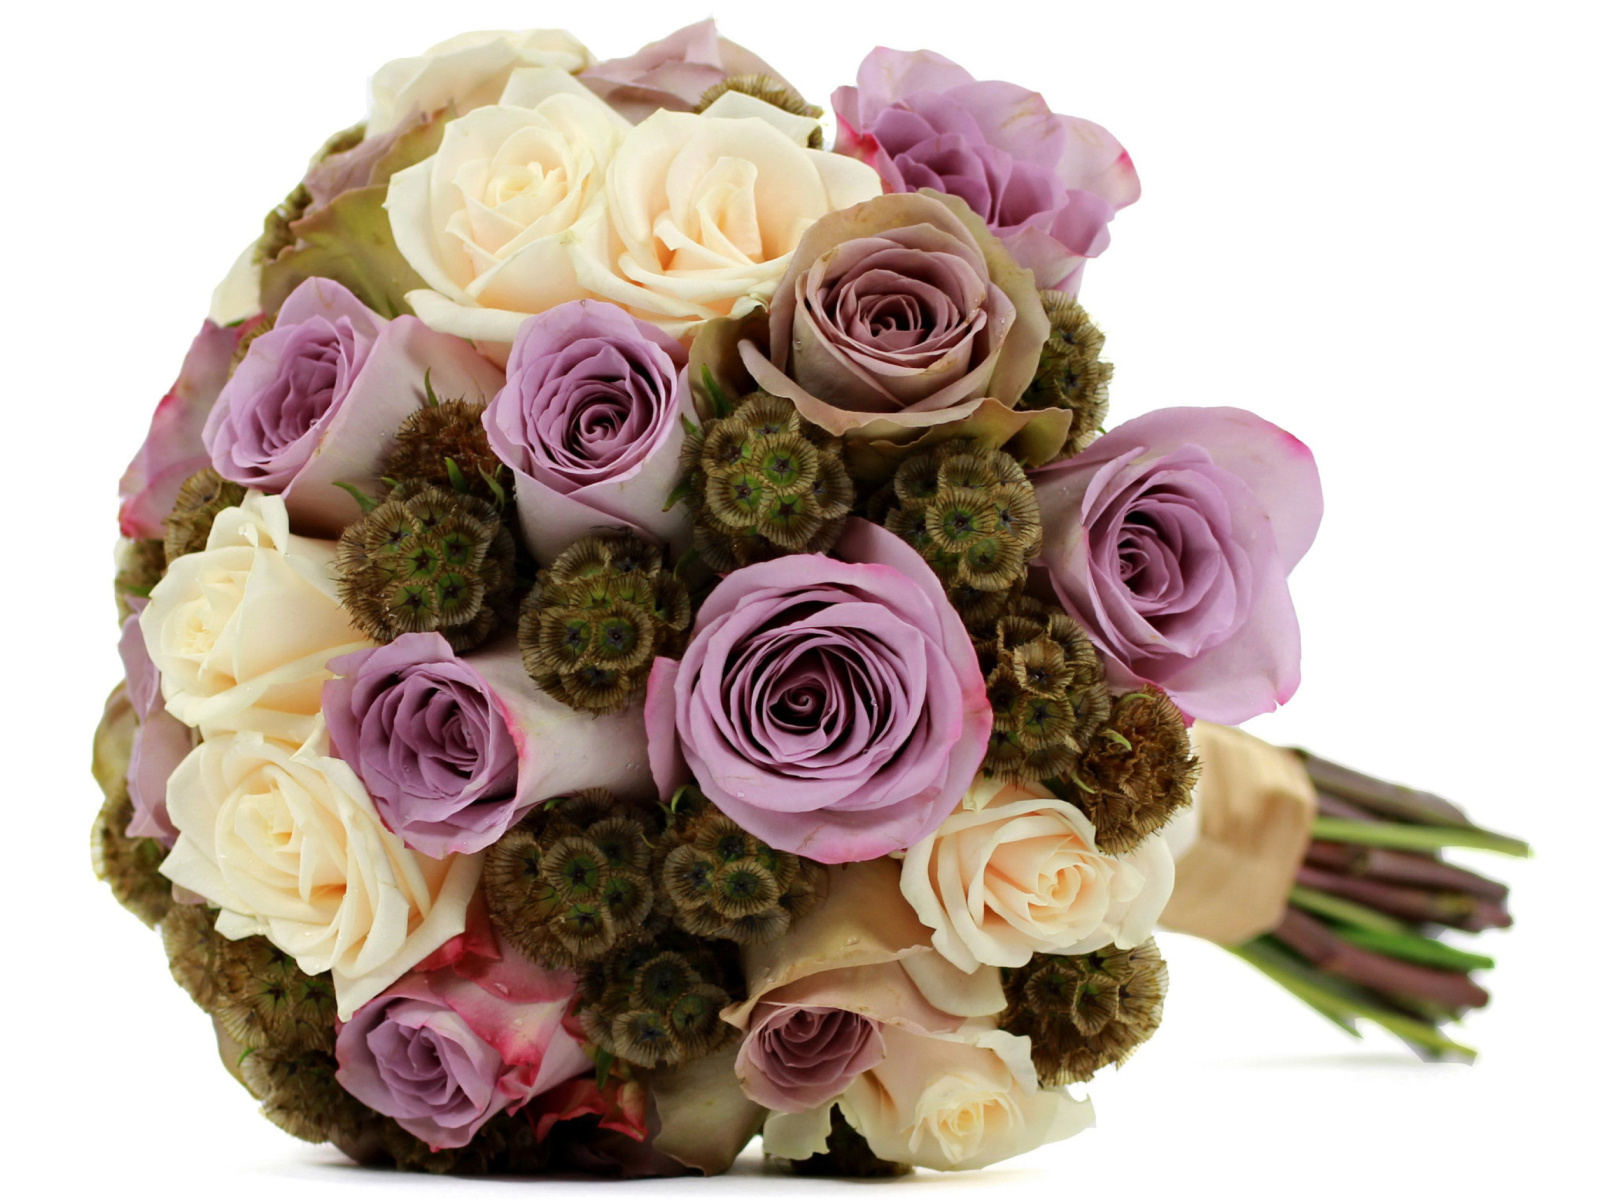 Bouquet with lilac roses screenshot #1 1600x1200